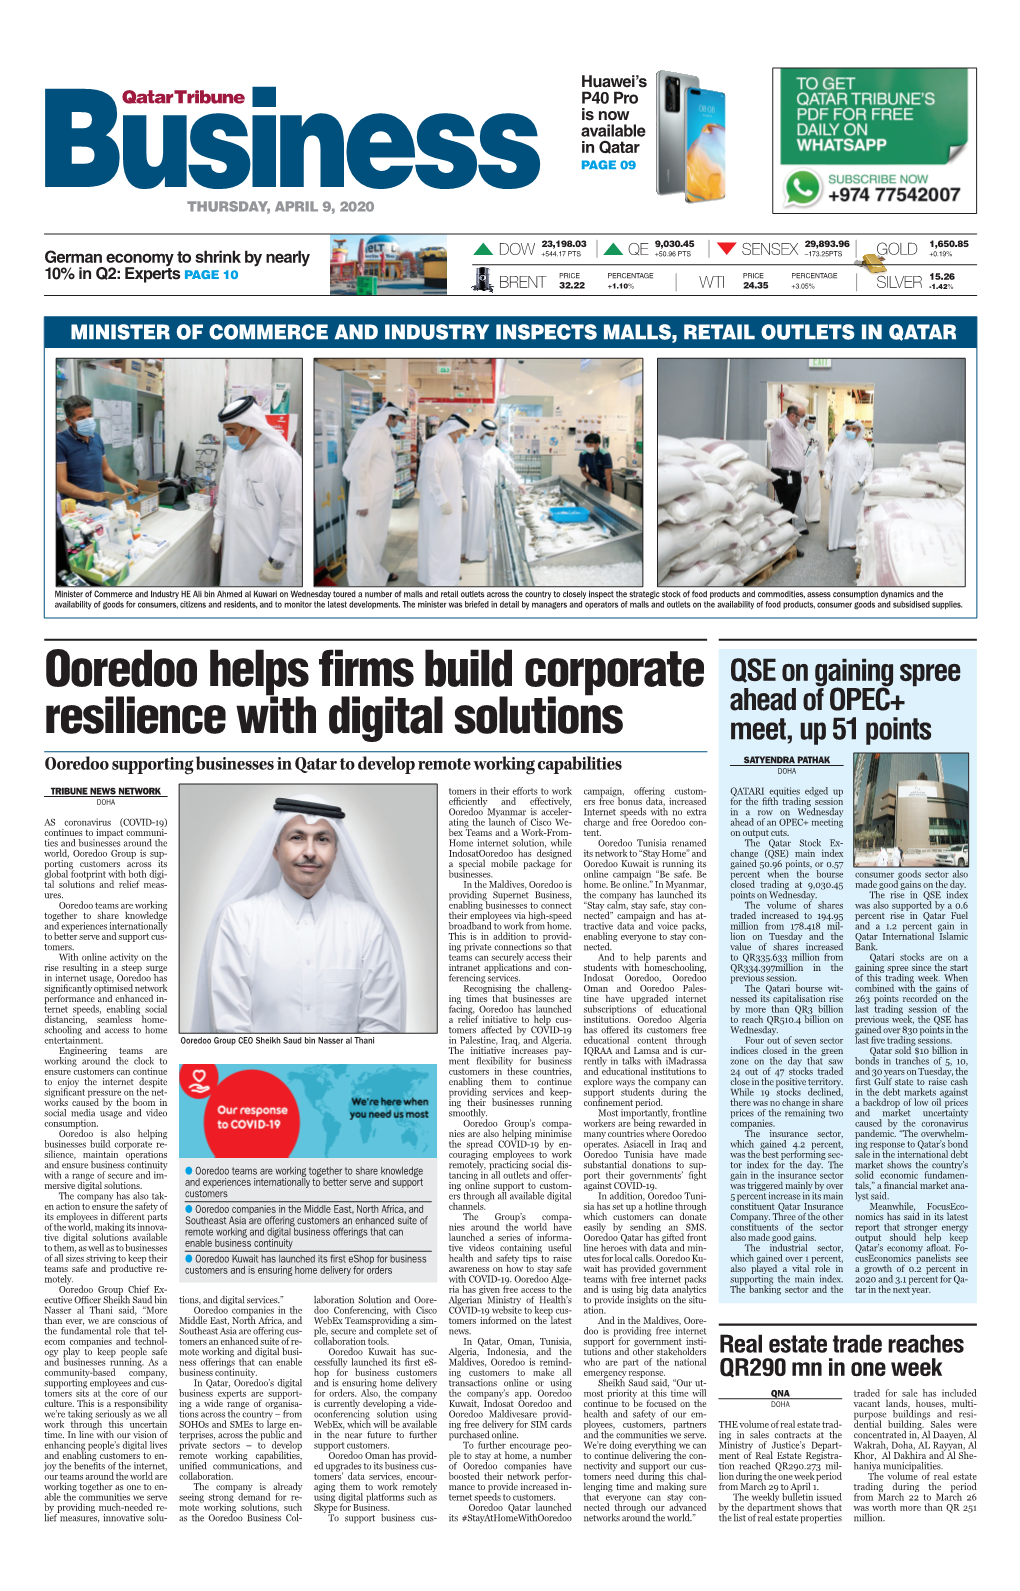 Ooredoo Helps Firms Build Corporate Resilience with Digital Solutions